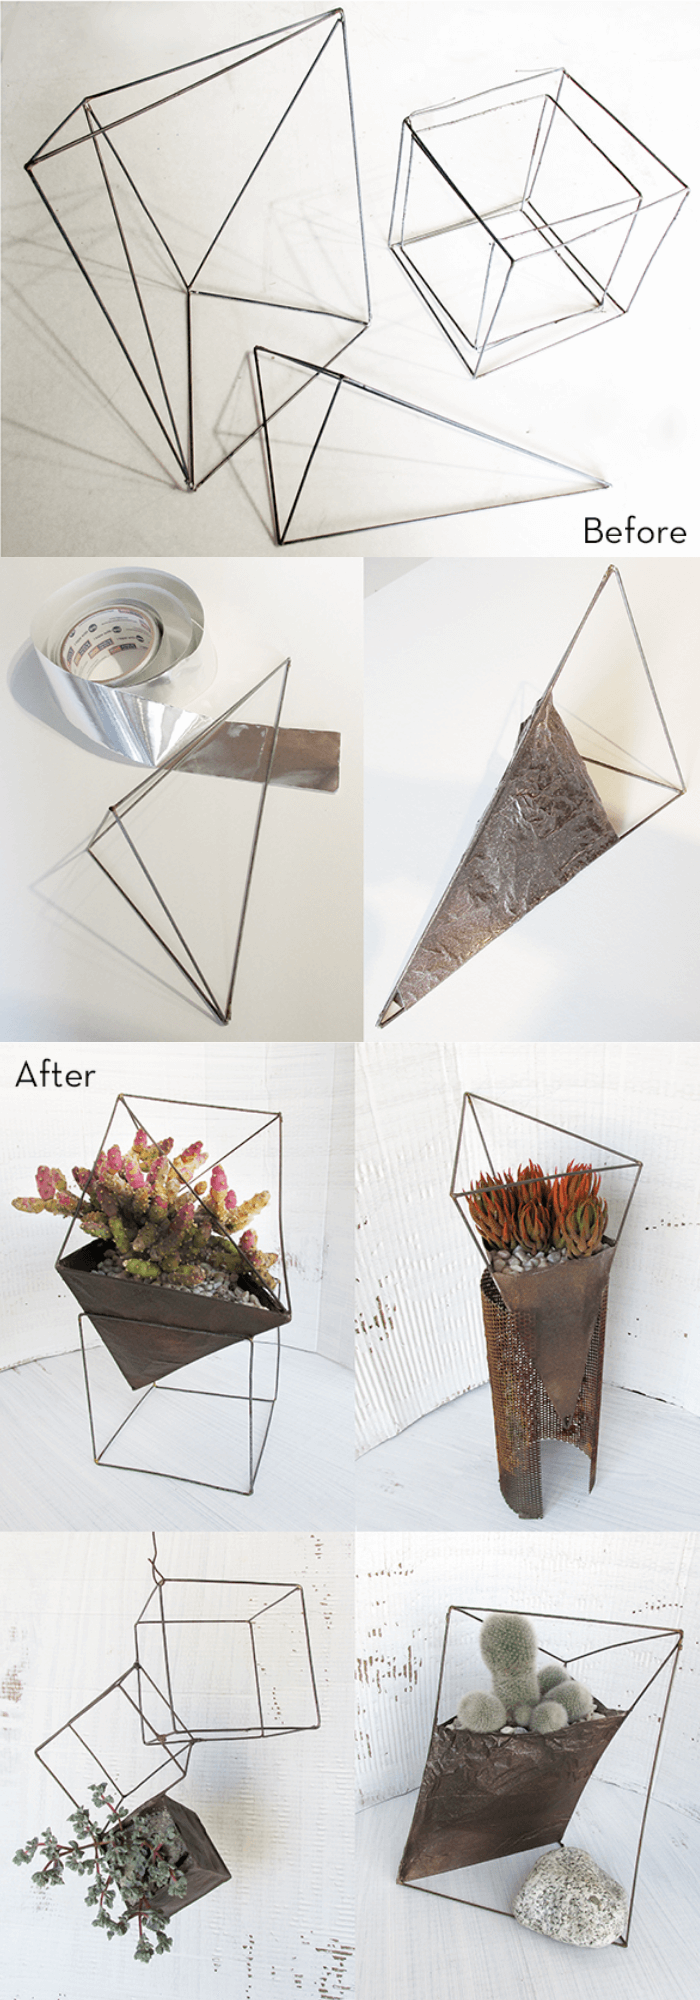 Turn Wire Sculptures into Geometric Succulent Planters